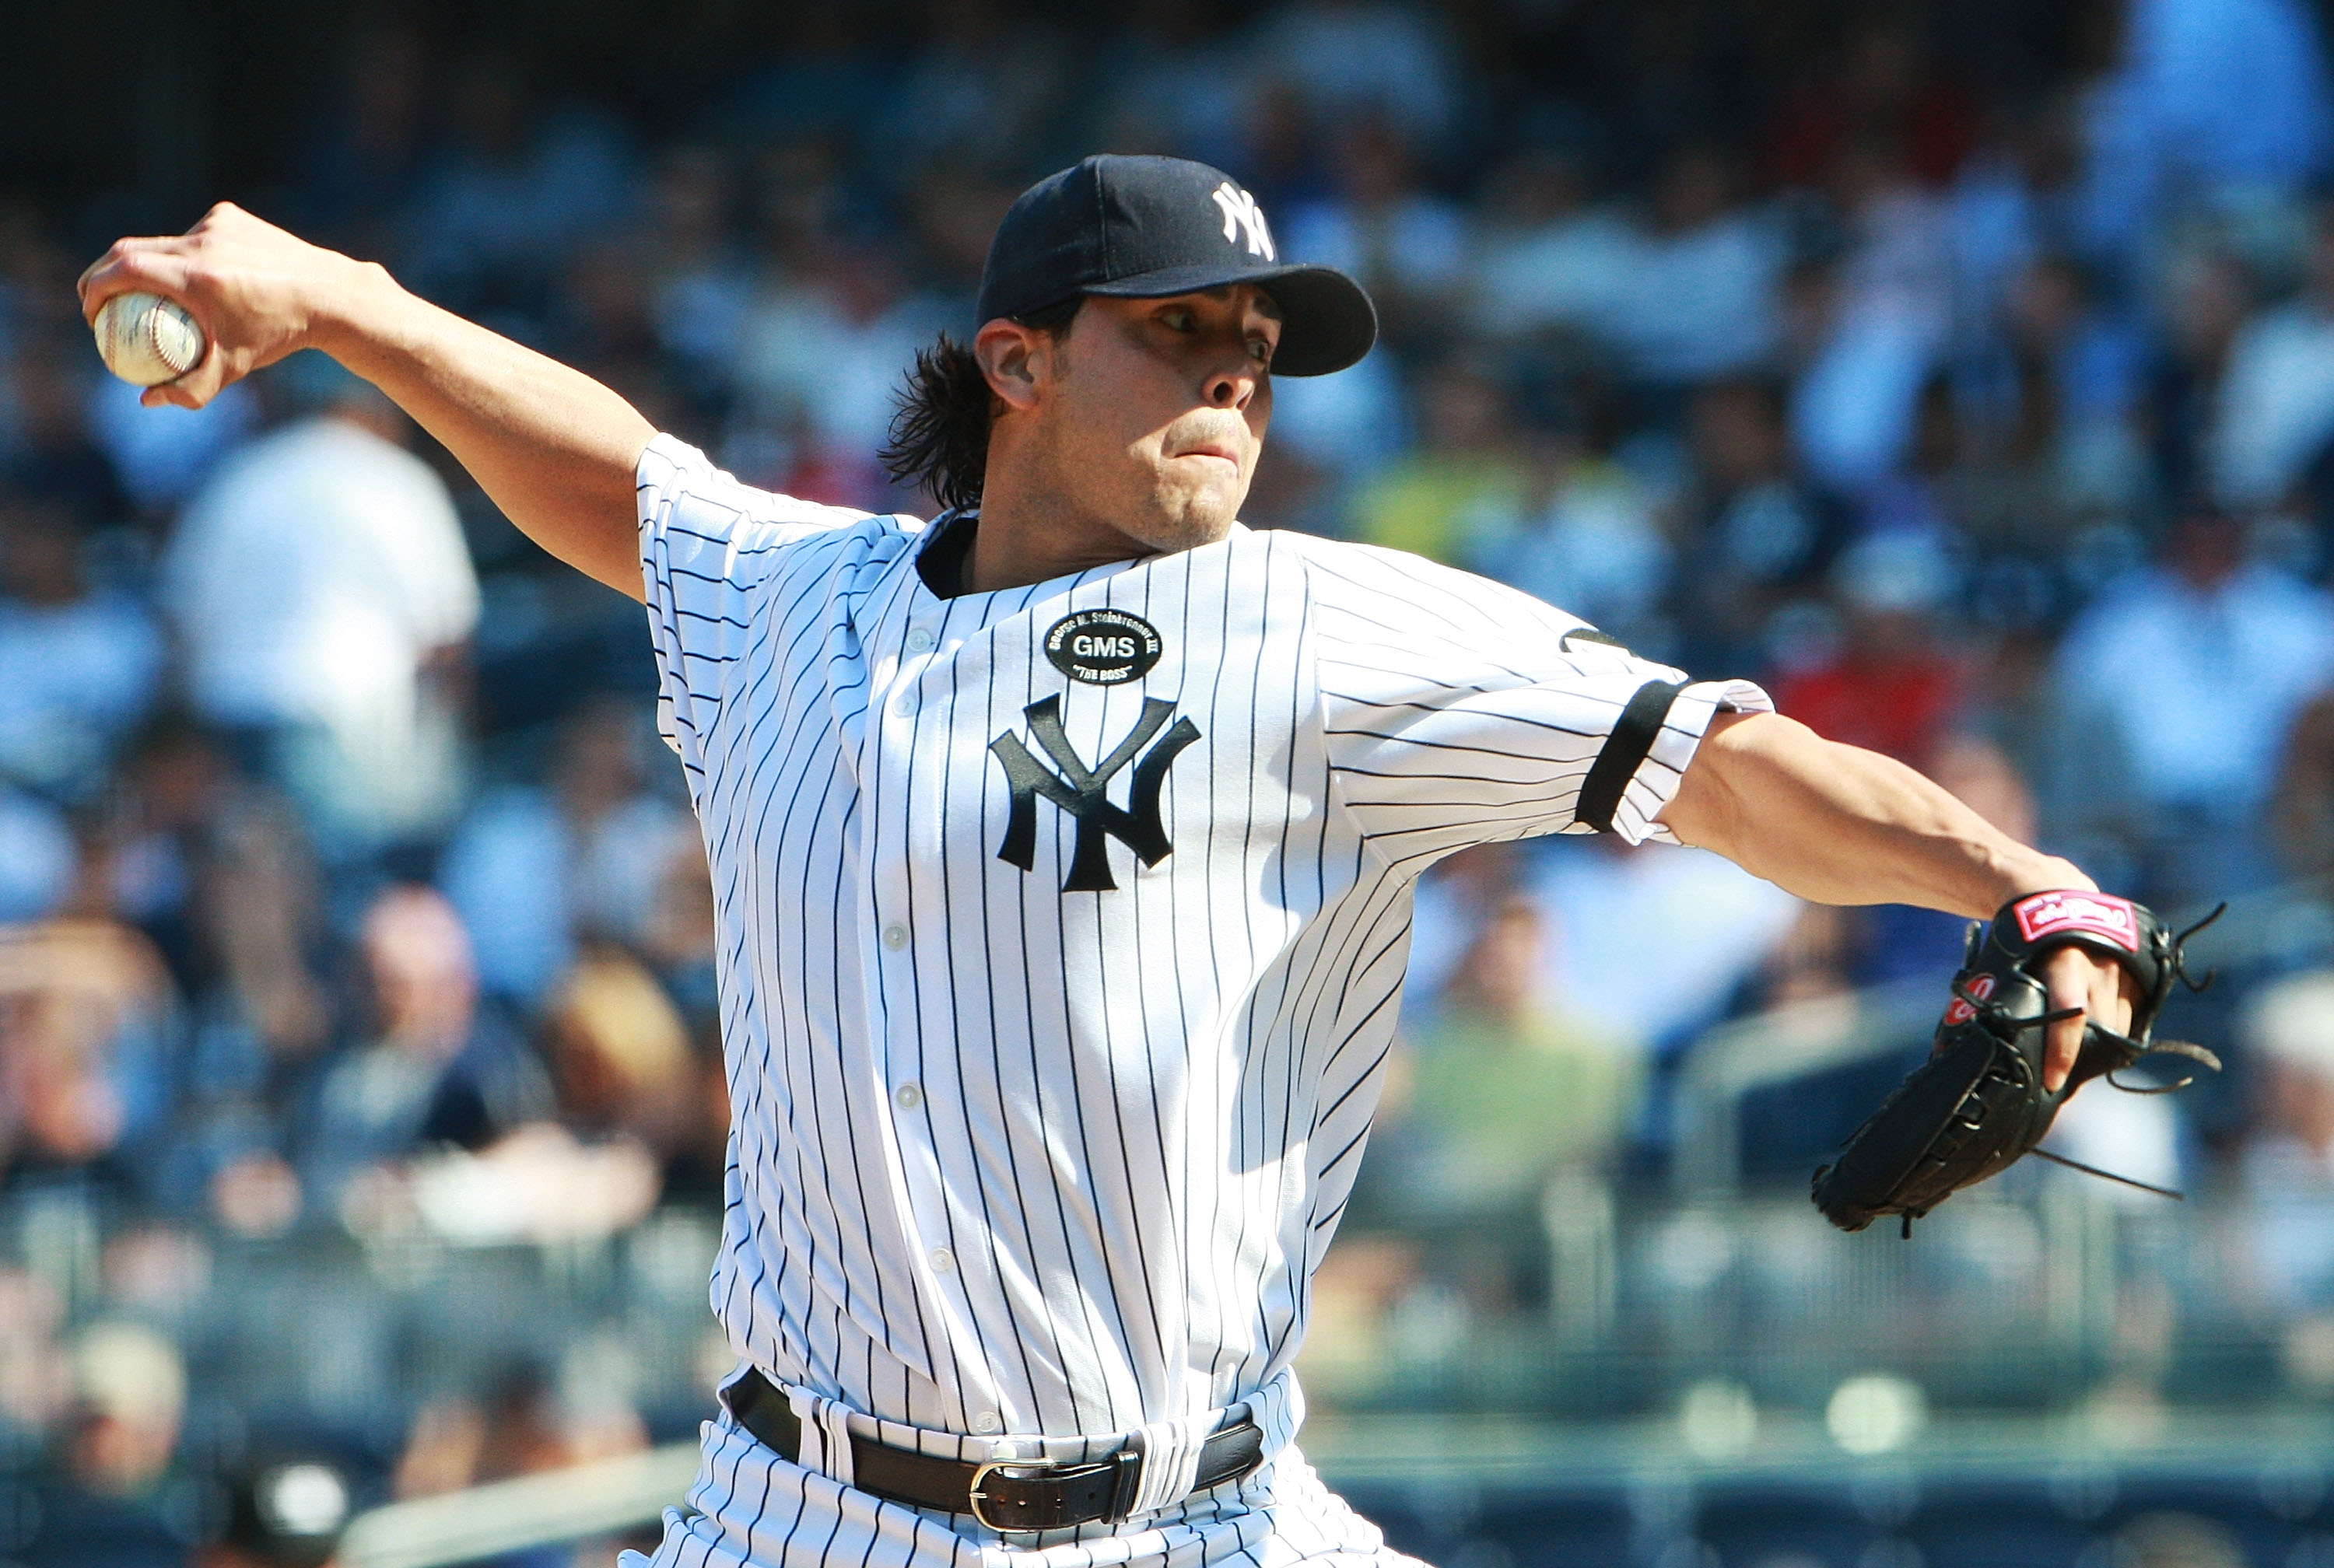 Former New York Yankees pitcher Sergio Mitre is under investigation in the disturbing case of a 2-year-old's rape and murder.